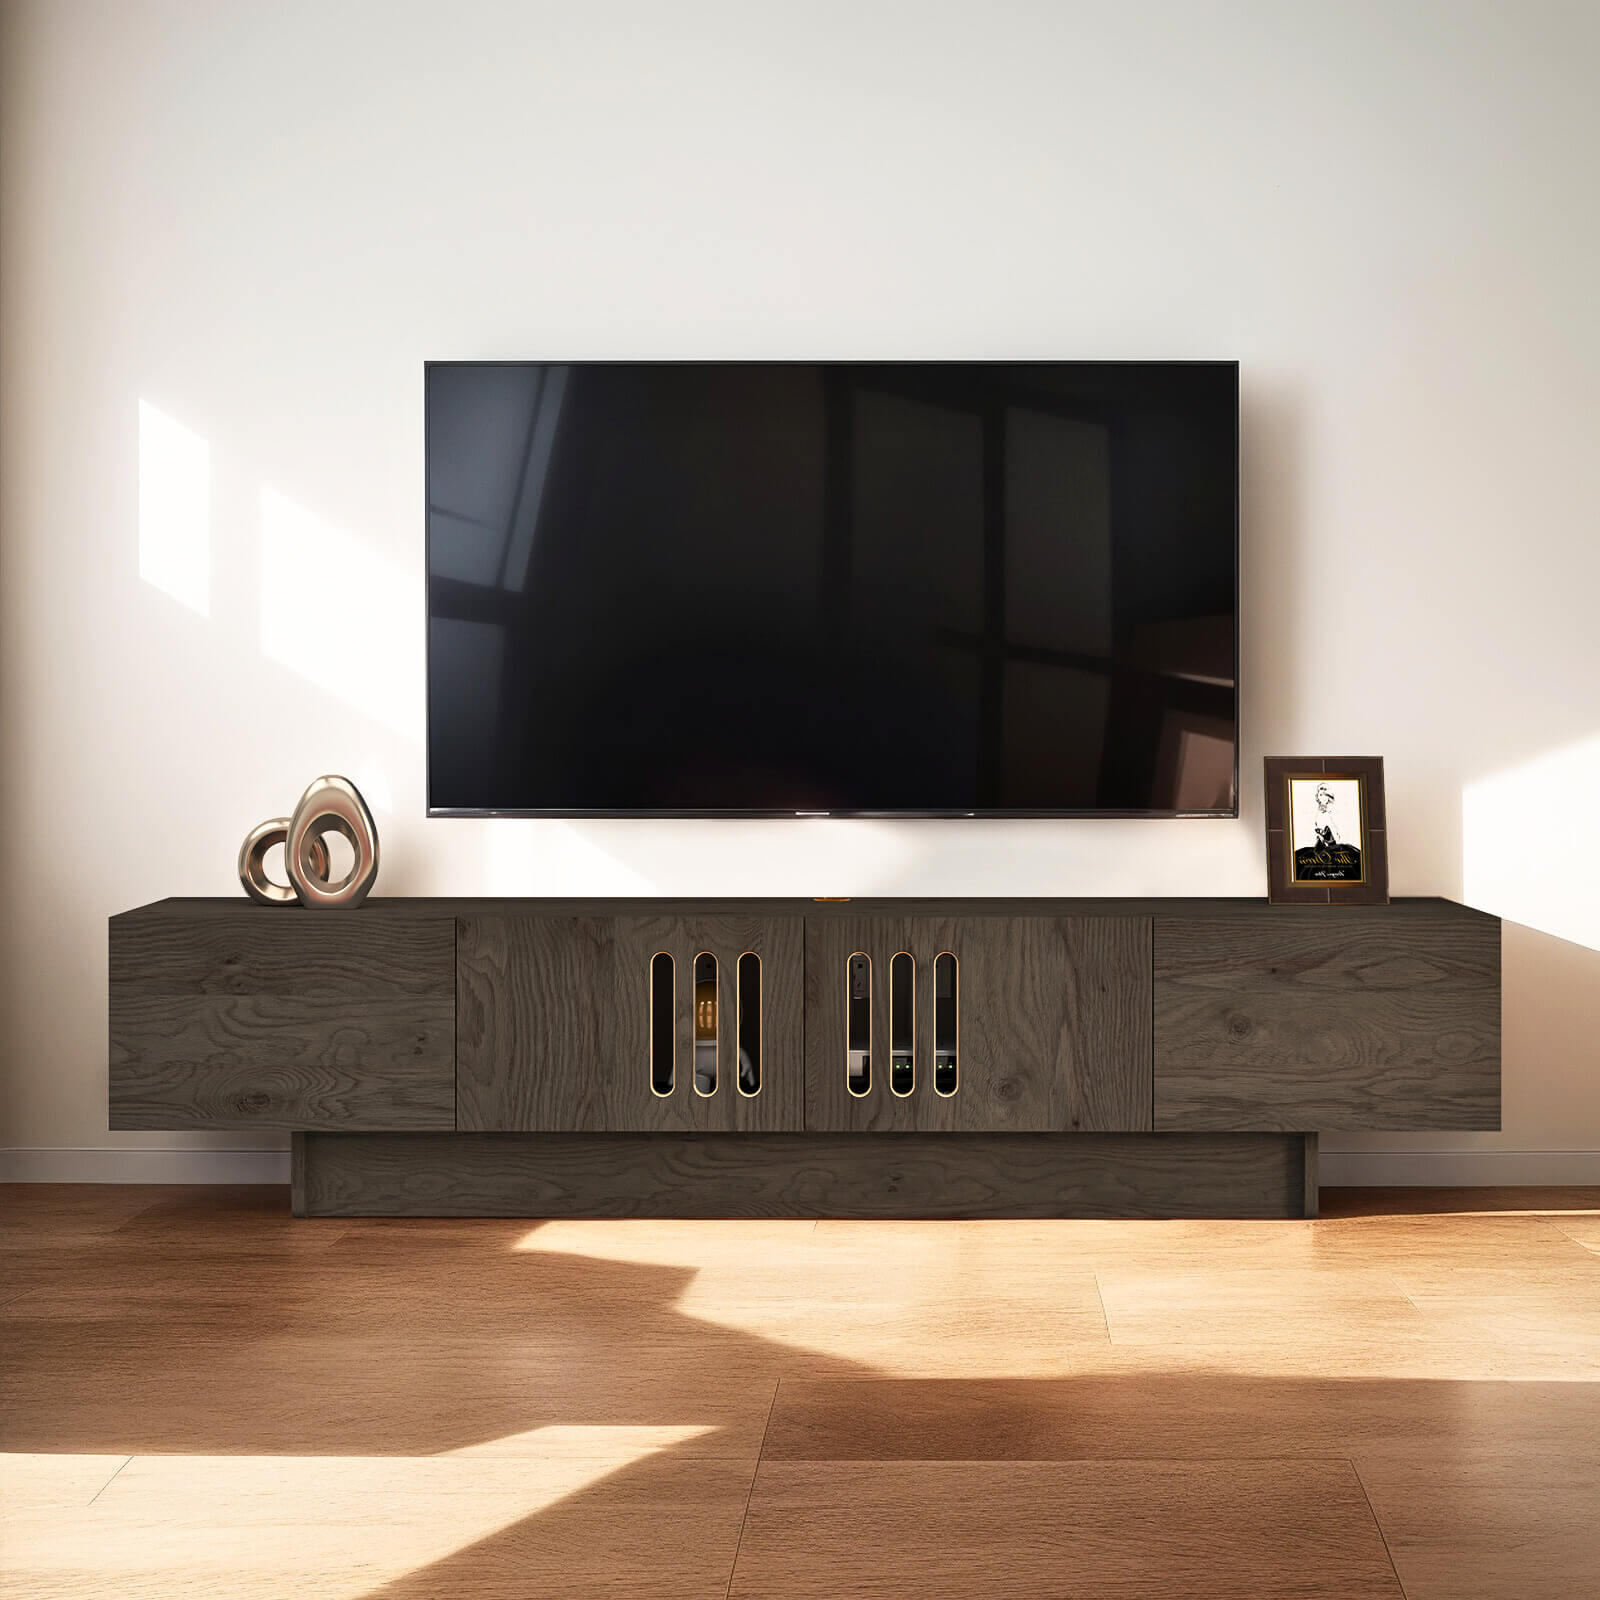 75.85" Dark Grey Modern Minimalist Wood Floating TV Stand with Above Shelf and Slatted Door